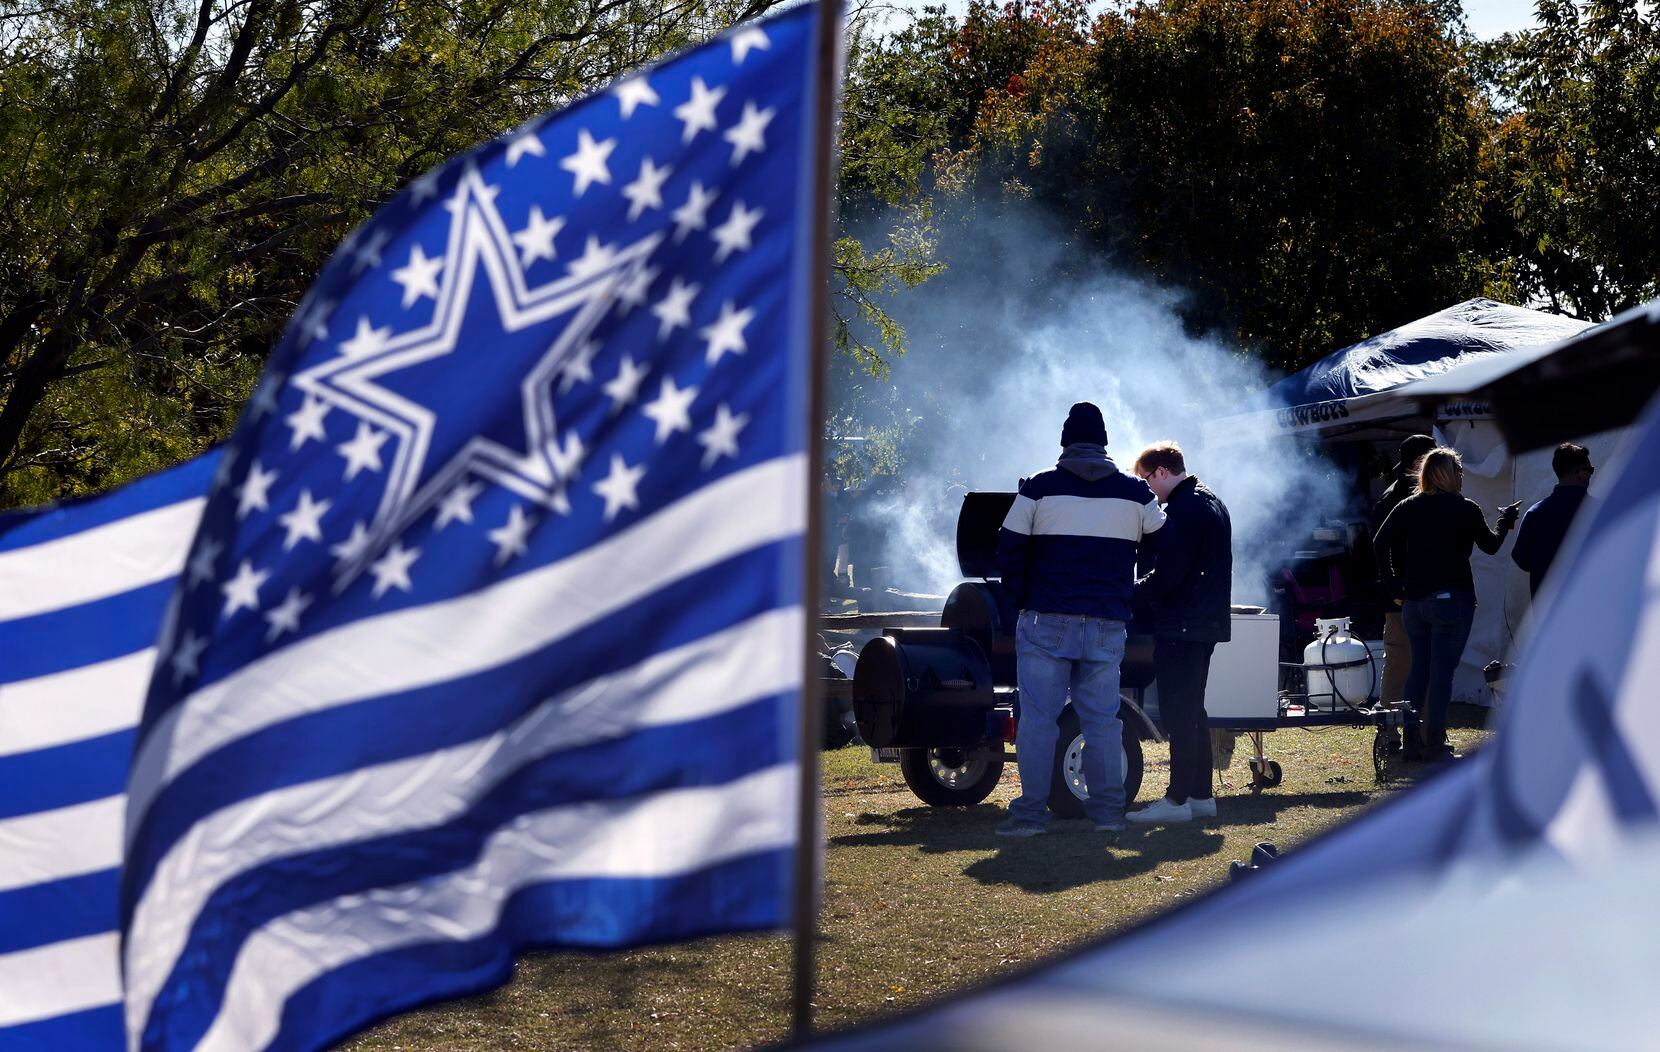 Dallas Cowboys fans cook their Thanksgiving feast on a grill during a tailgate party outside of AT&T Stadium in Arlington, November 25, 2021. The Cowboys were facing the Las Vegas Raiders on Thanksgiving Day. (Tom Fox/The Dallas Morning News)